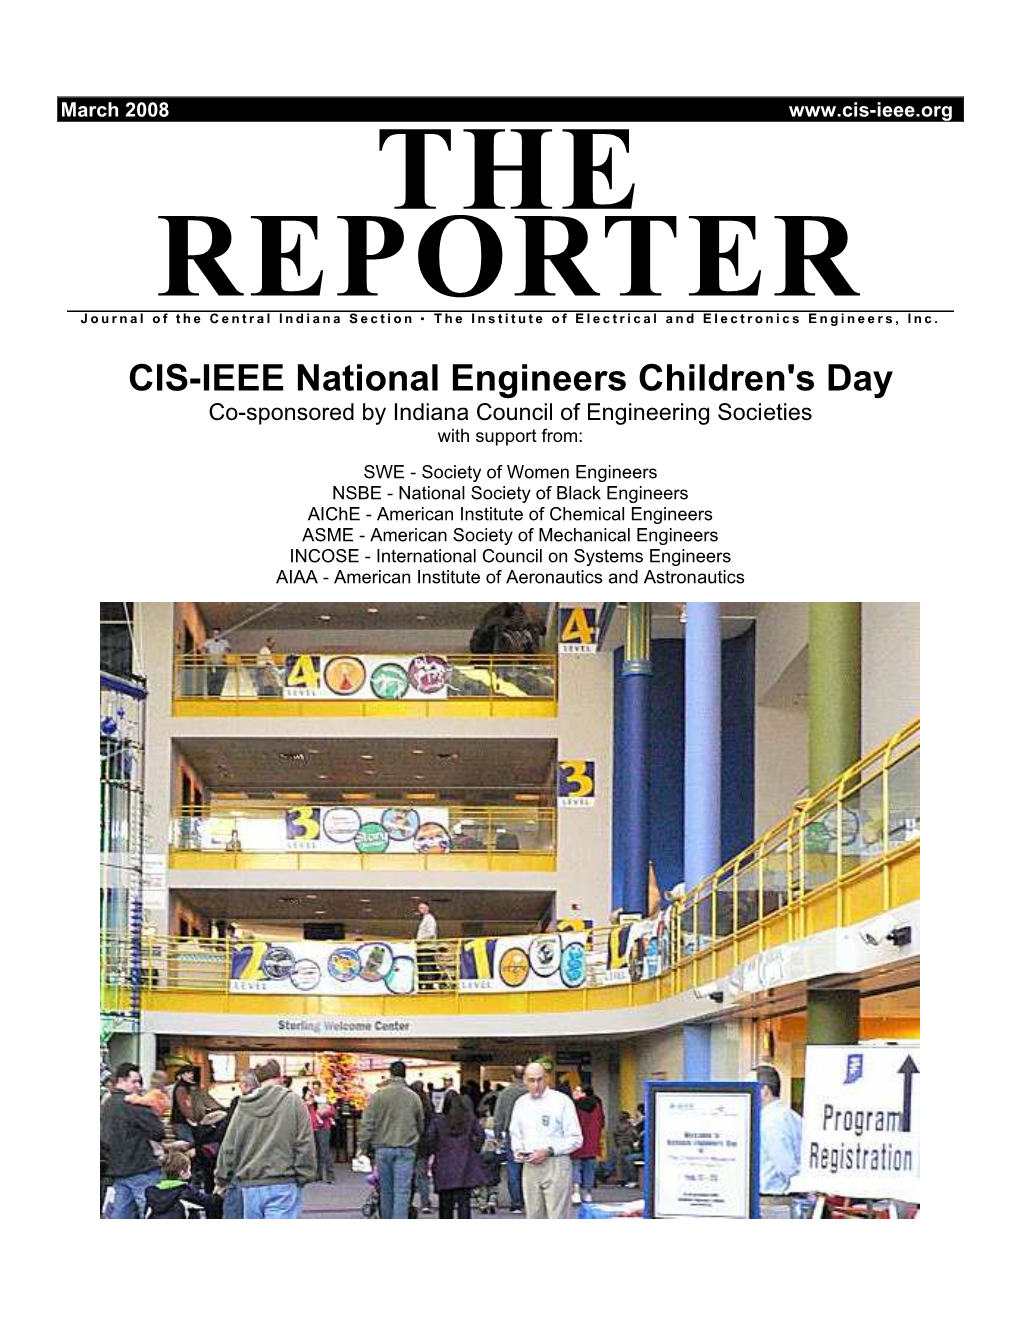 CIS-IEEE National Engineers Children's Day Co-Sponsored by Indiana Council of Engineering Societies with Support From